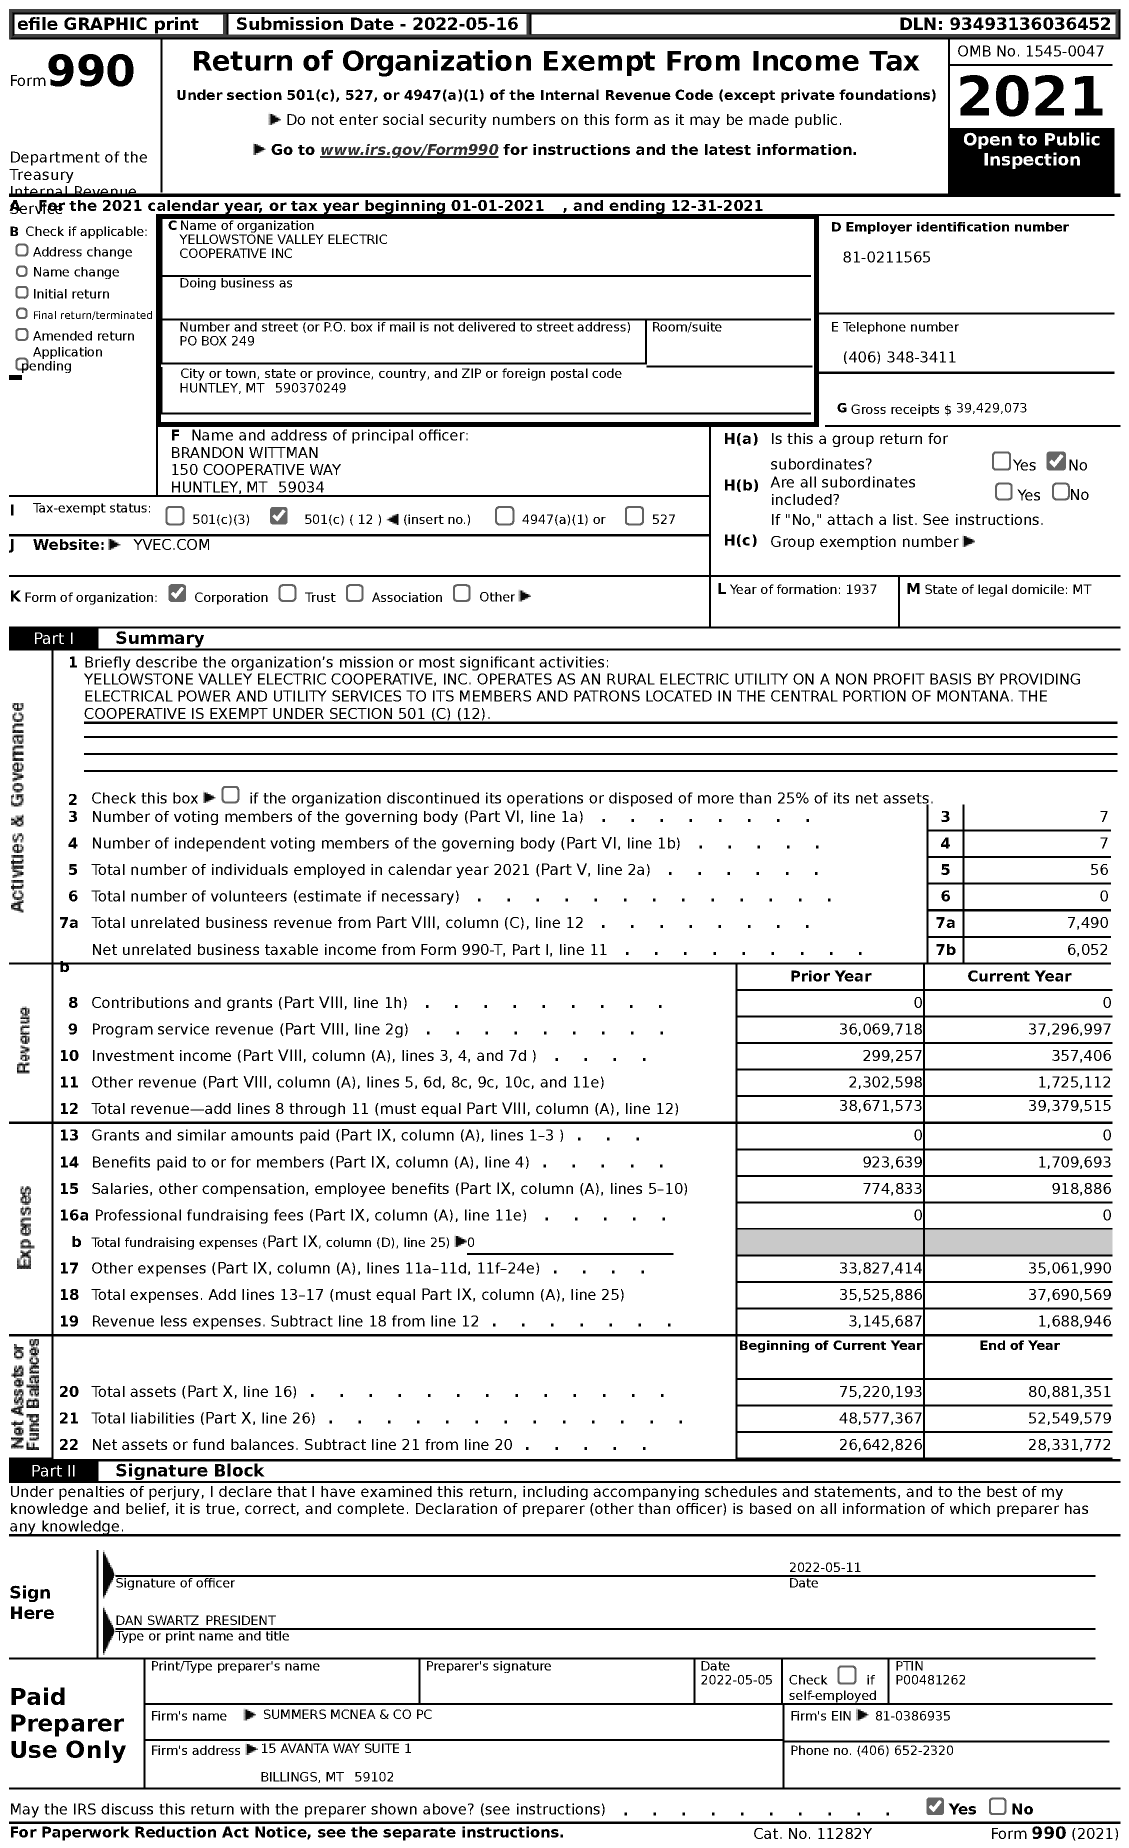 Image of first page of 2021 Form 990 for Yellowstone Valley Electric Cooperative